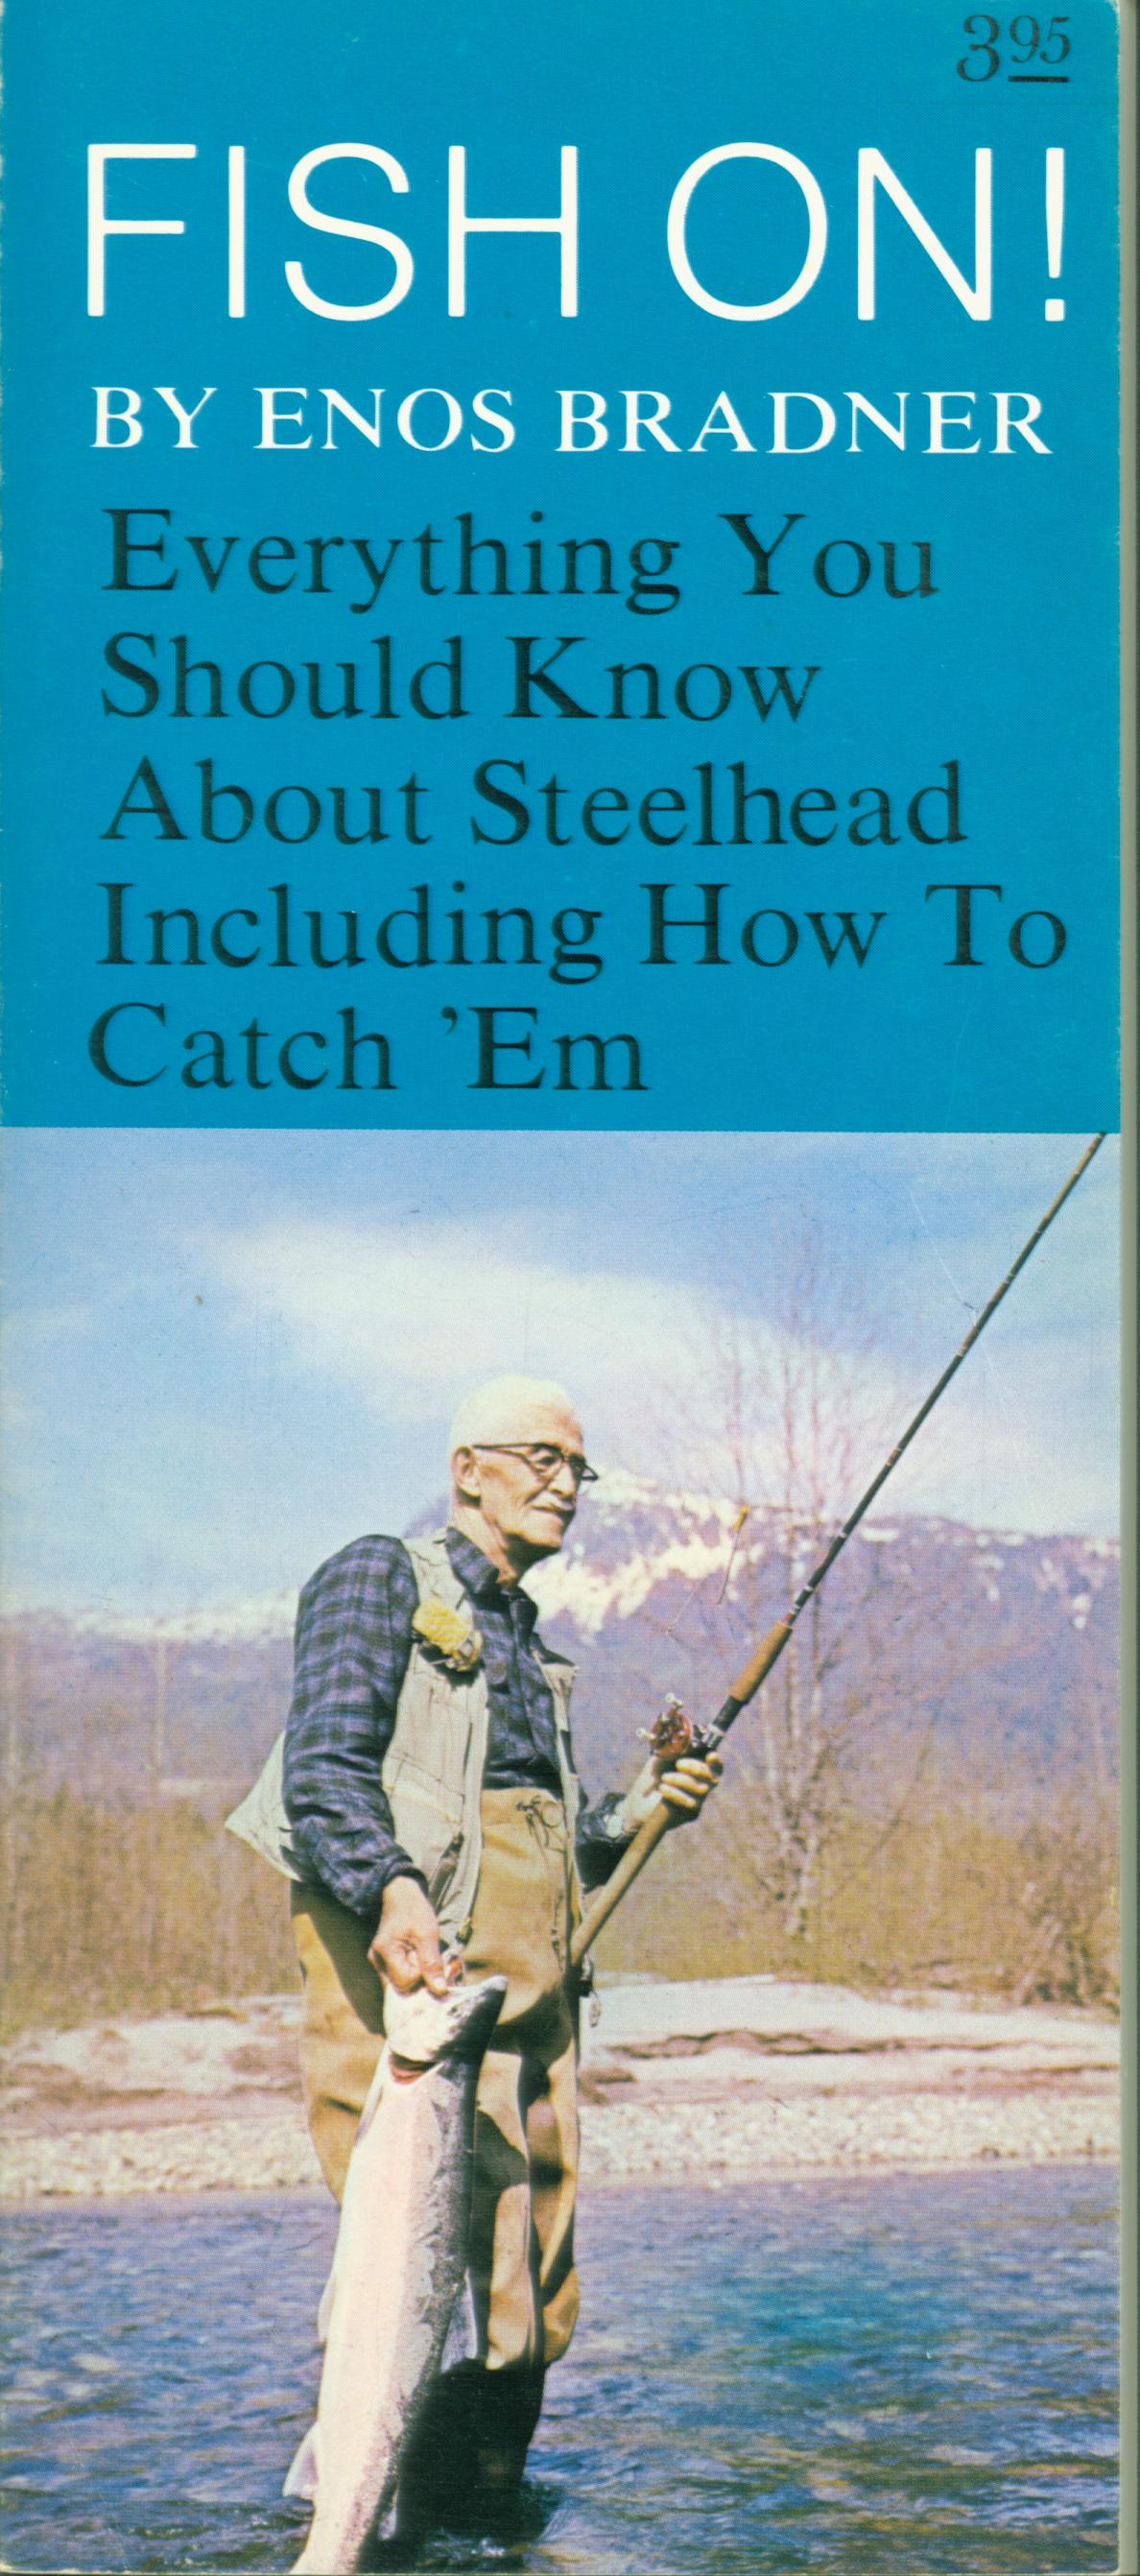 FISH ON! everything you should know about steelhead including how to catch 'em.